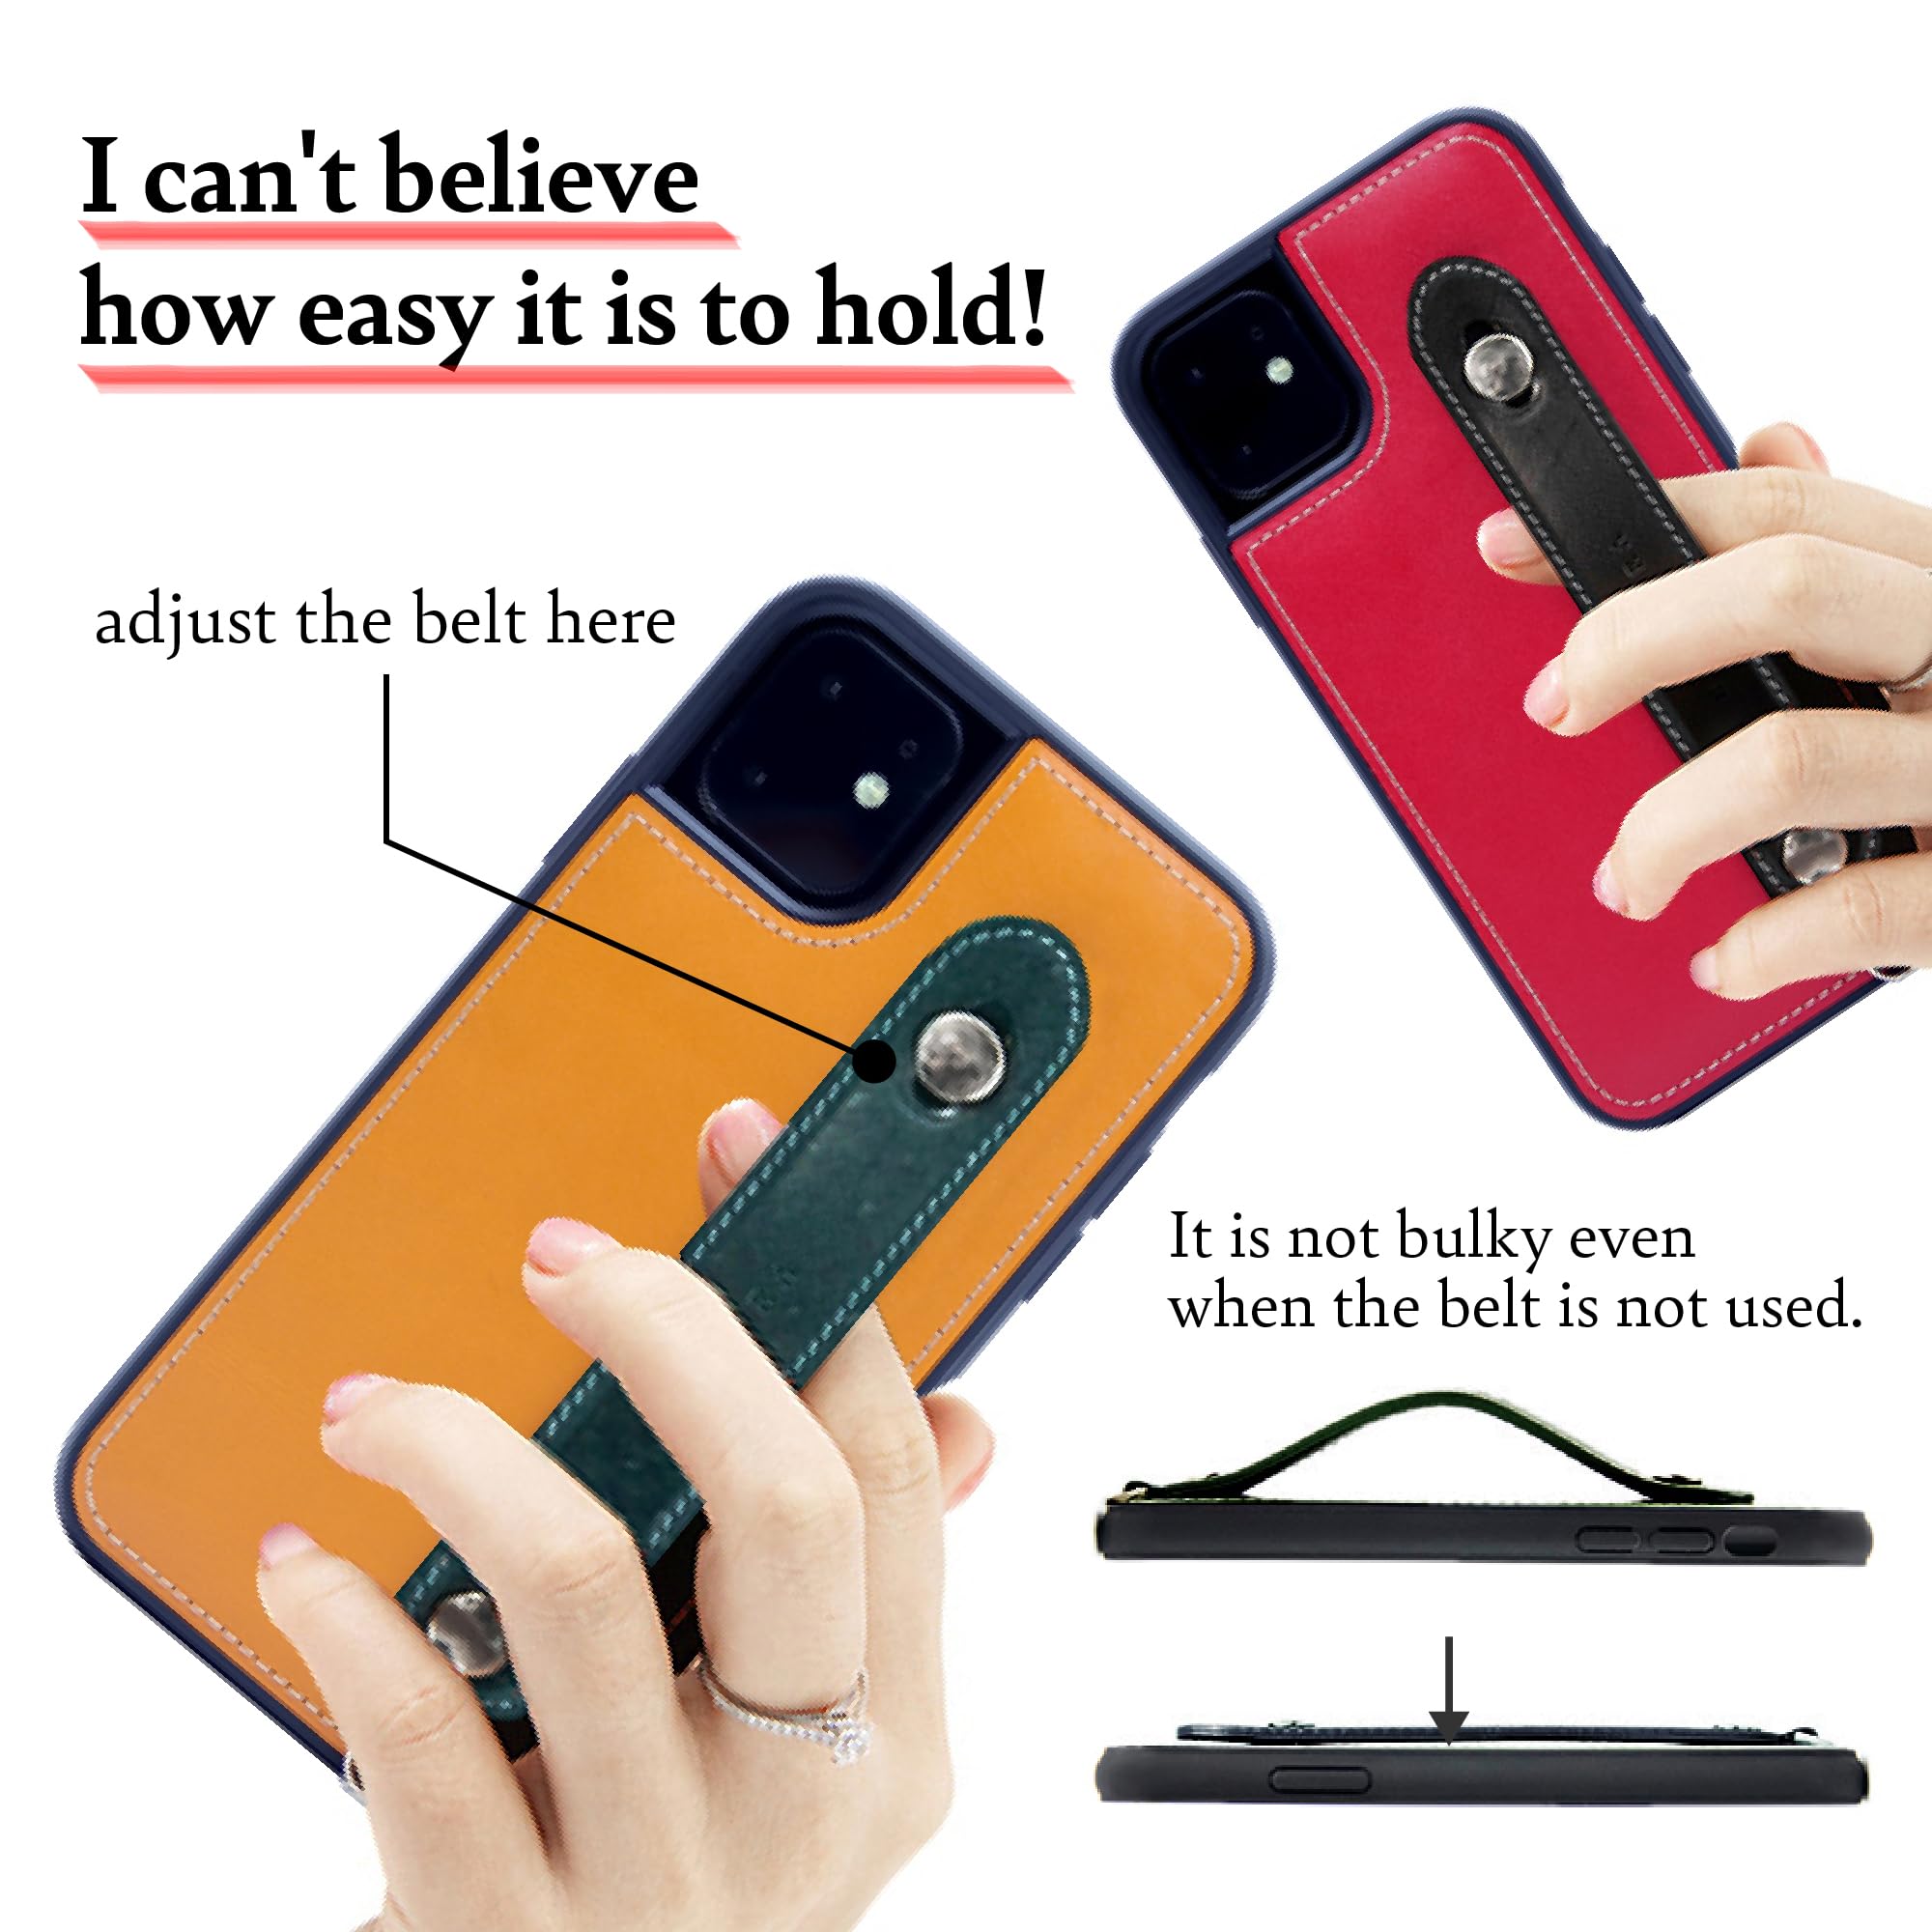 hanatora] iPhone 11 Pro Max Case Genuine Leather Leather Grip Leather Strap Attached Italian Cowhide Tanned Leather One-Handed Card Slot Stand Function Men's Women's Red/Orange CGH-11ProMax-Red-OG-US